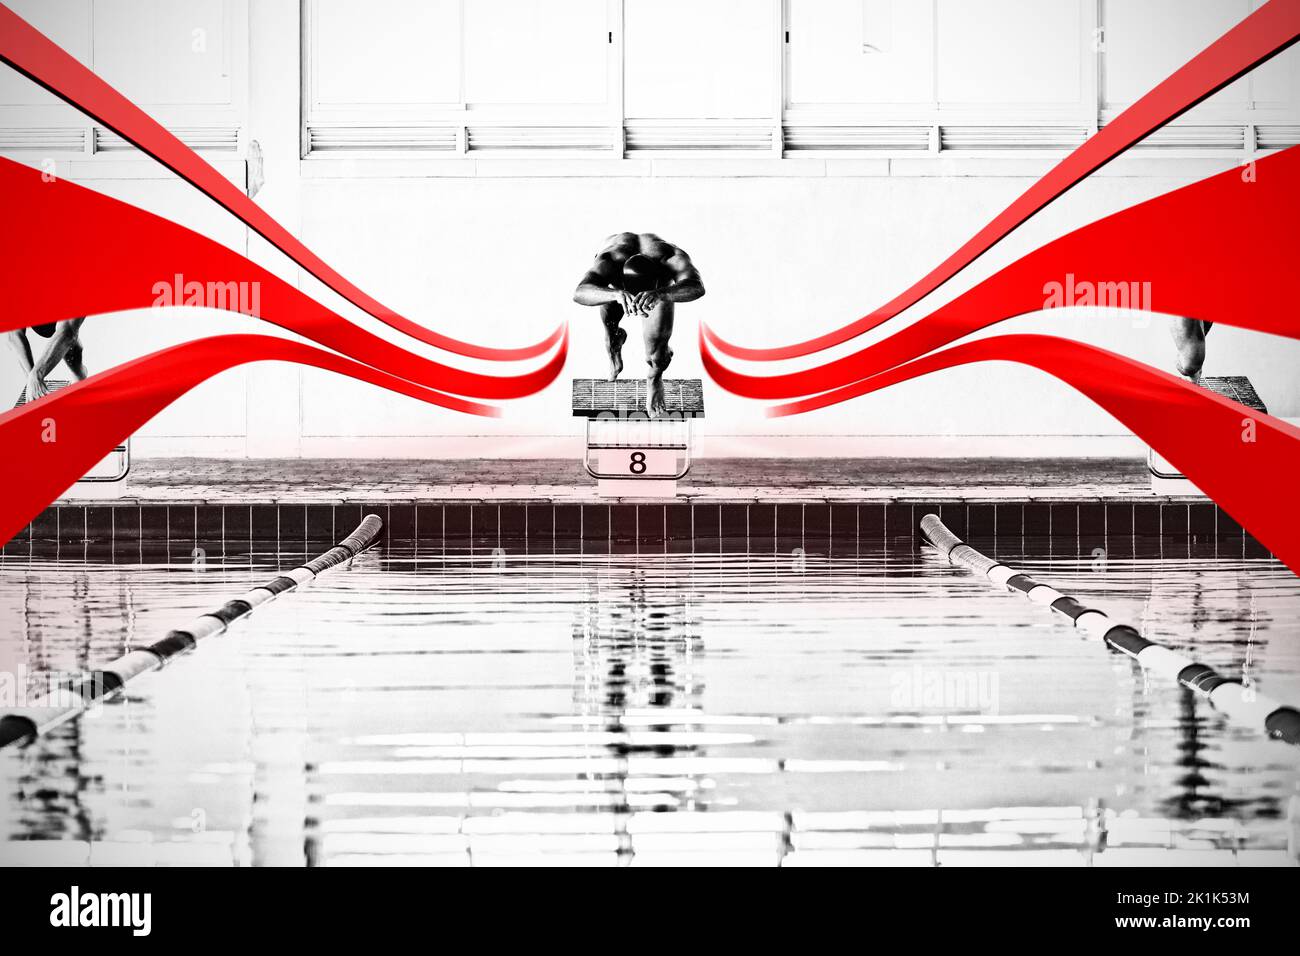 Grey line design against swimmers plunging in the pool Stock Photo